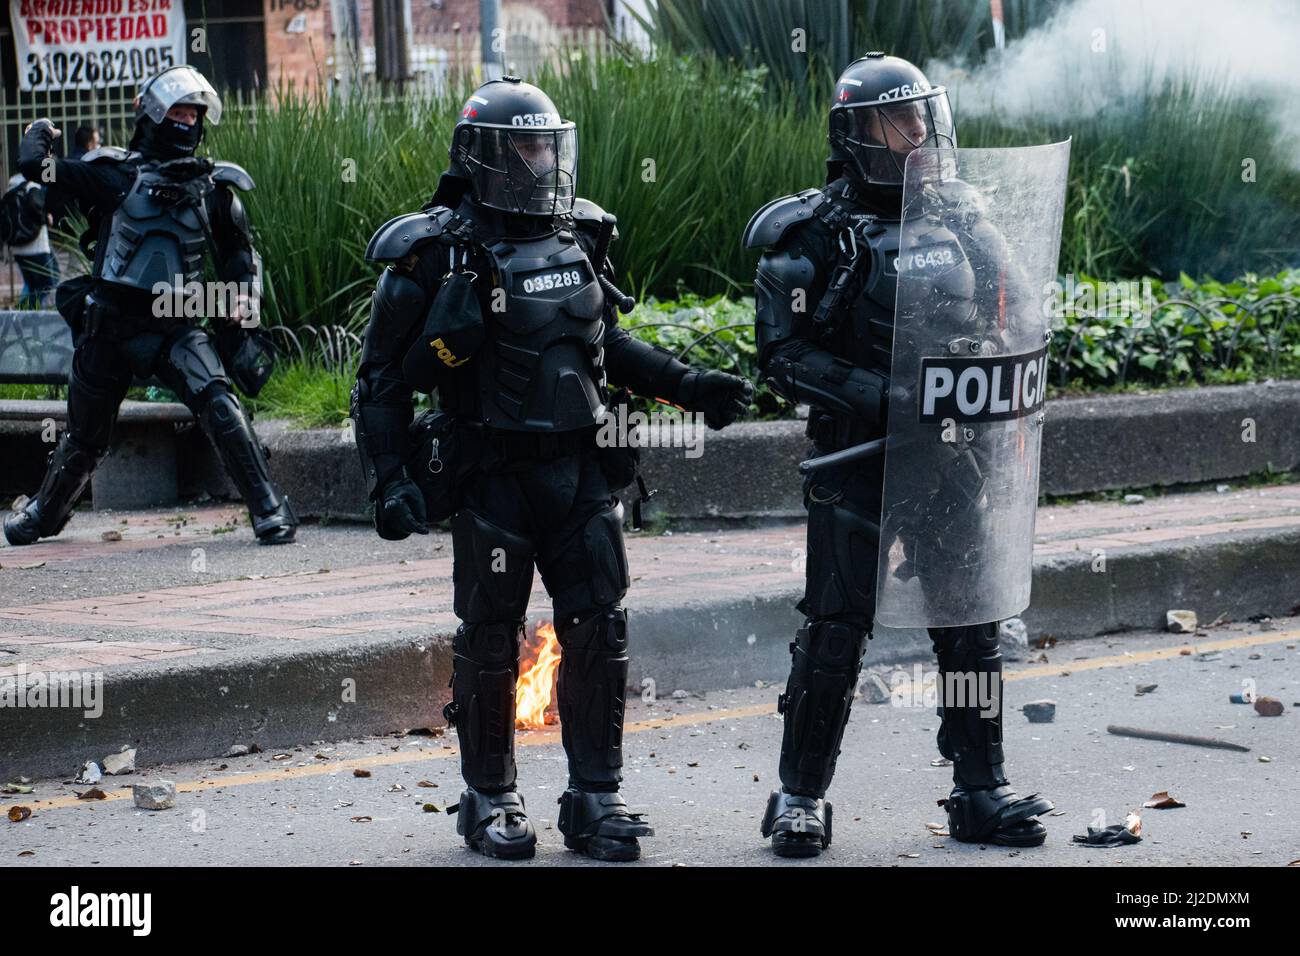 Colombia's riot police officers 'ESMAD' use shields and tear gas as students protested against Colombia's national police and government on March 31, 2022 in Bogota, Colombia. As demonstrators and Colombia's riot police squad 'ESMAD' ended up in clashes in northern Bogota. Photo by: Daniel Romero/Long Visual Press Stock Photo